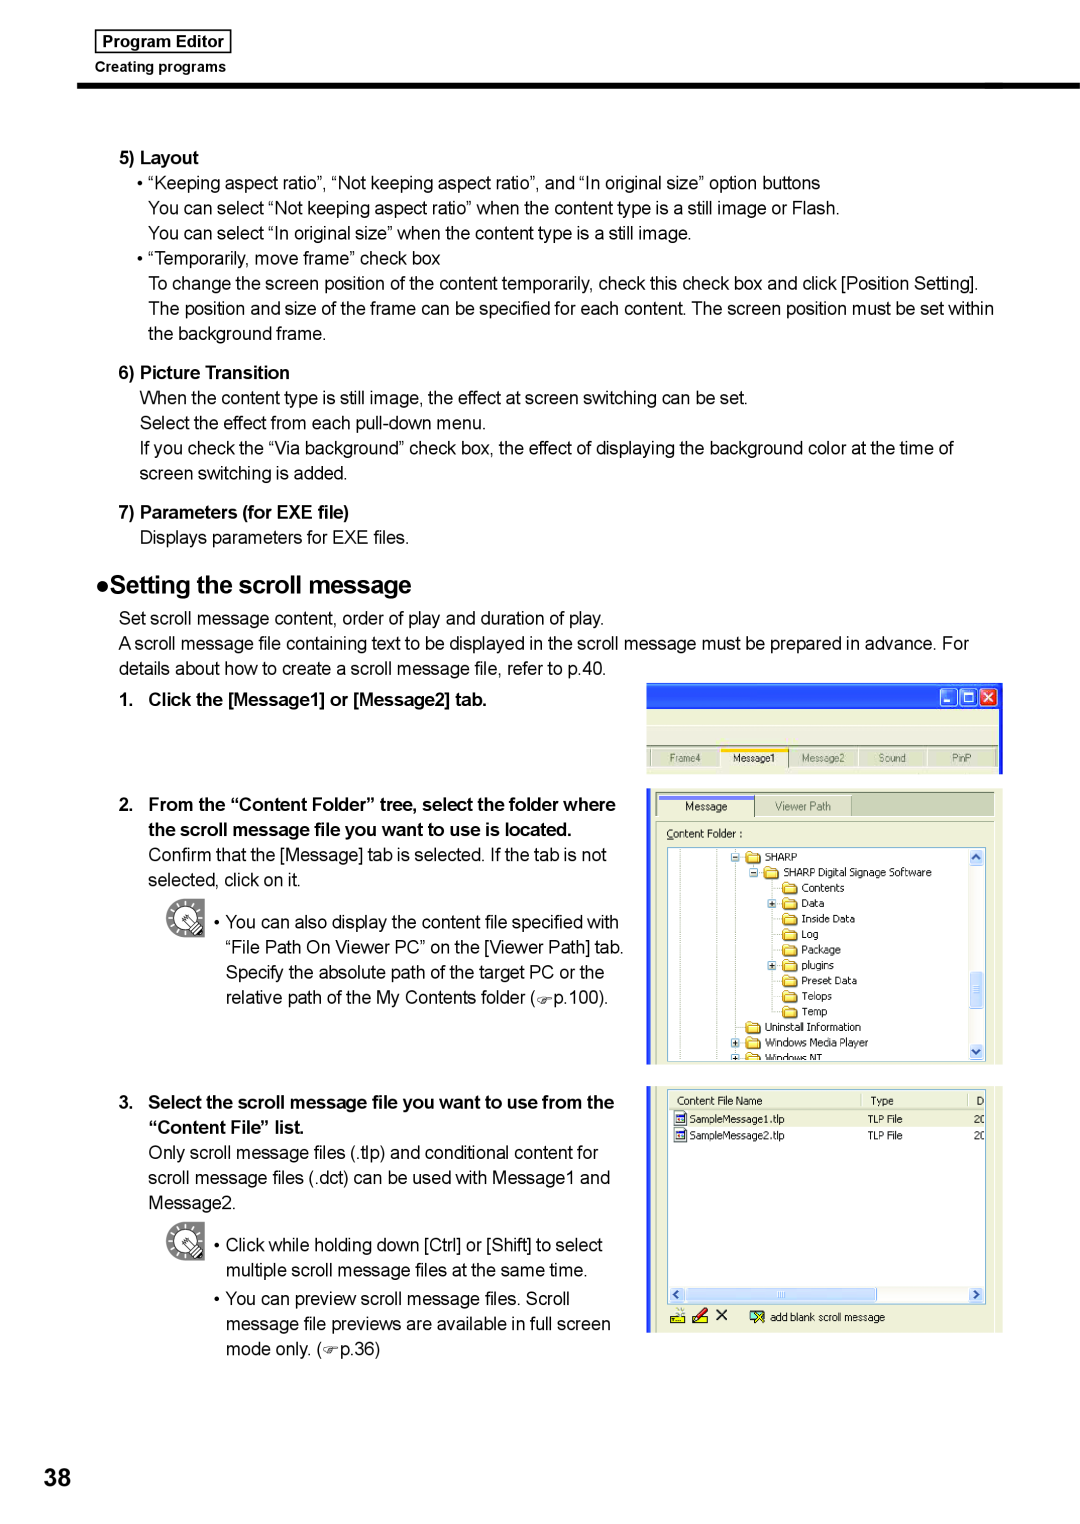 Sharp PNSV01 operation manual Setting the scroll message, Layout, Picture Transition, Click the Message1 or Message2 tab 